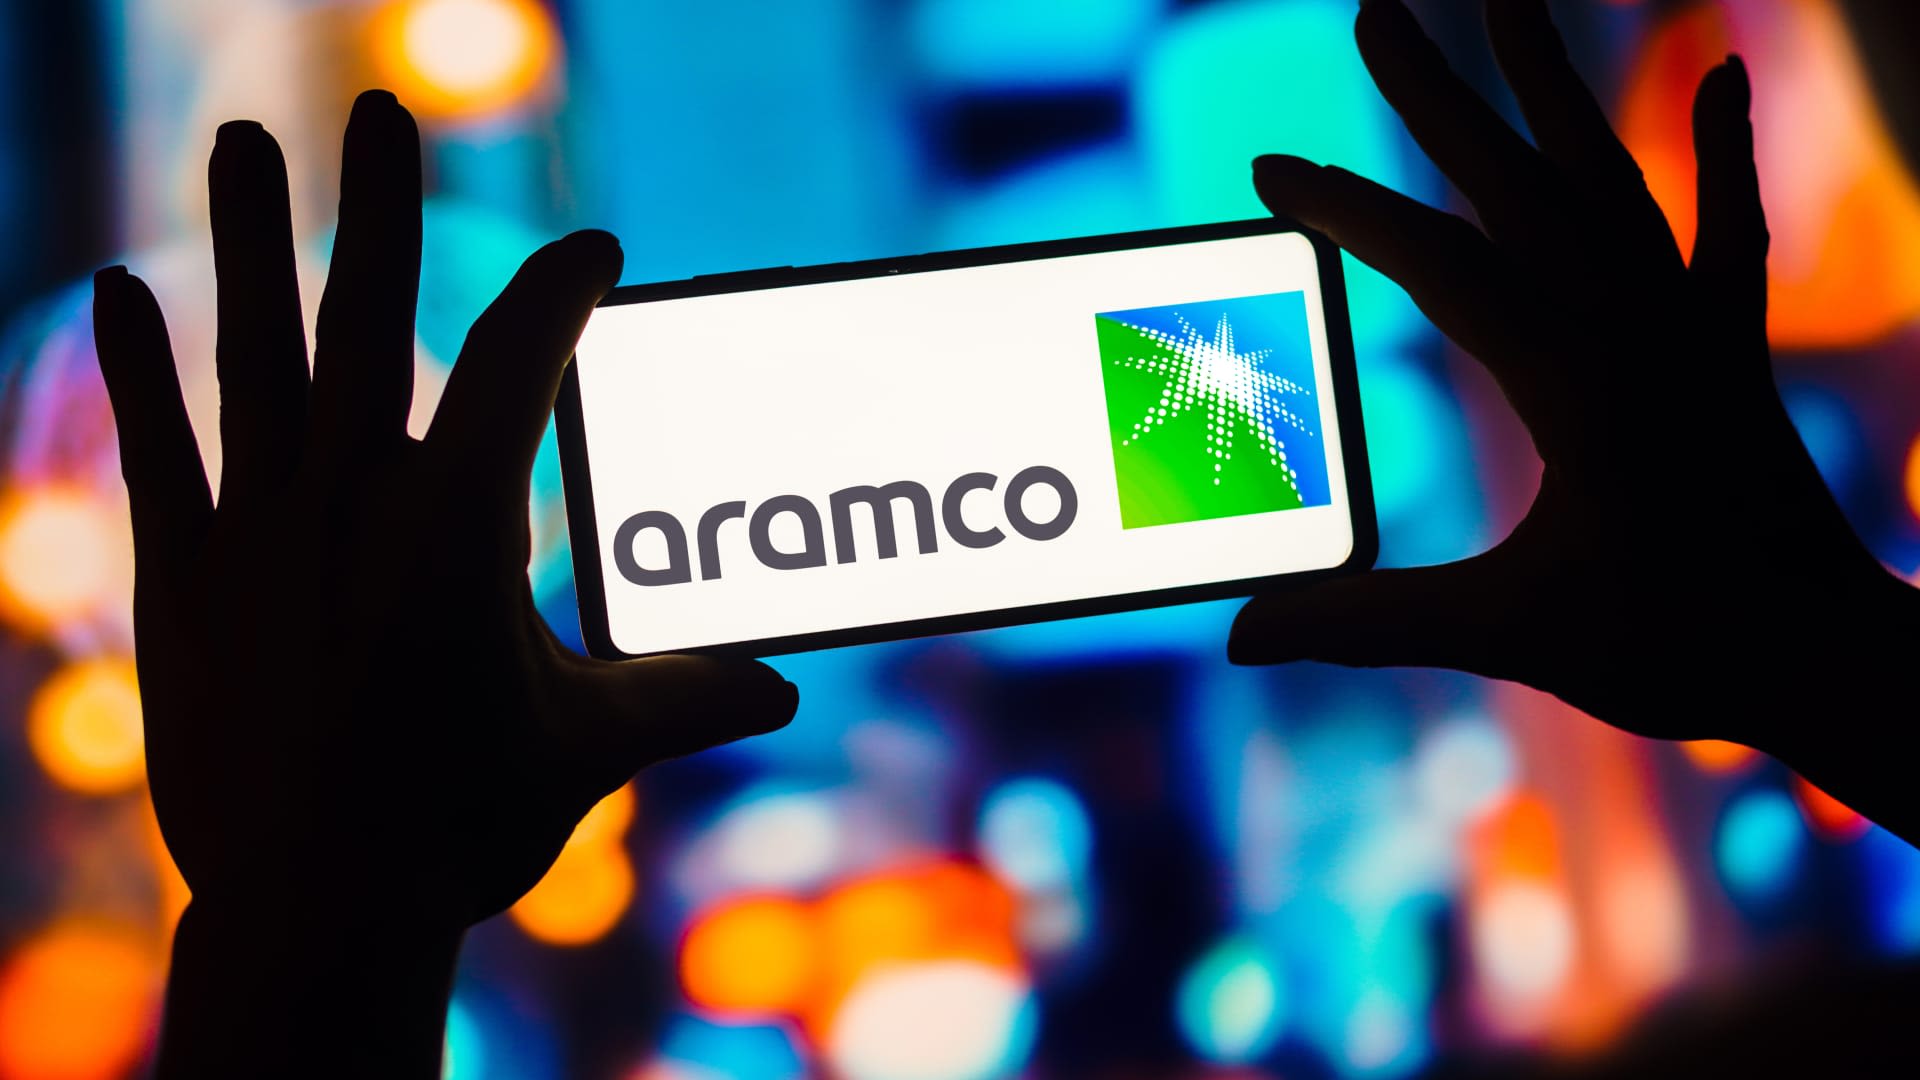 Saudi Arabia set to raise over $11.2 billion from Aramco stock sale, priced at lower end of range